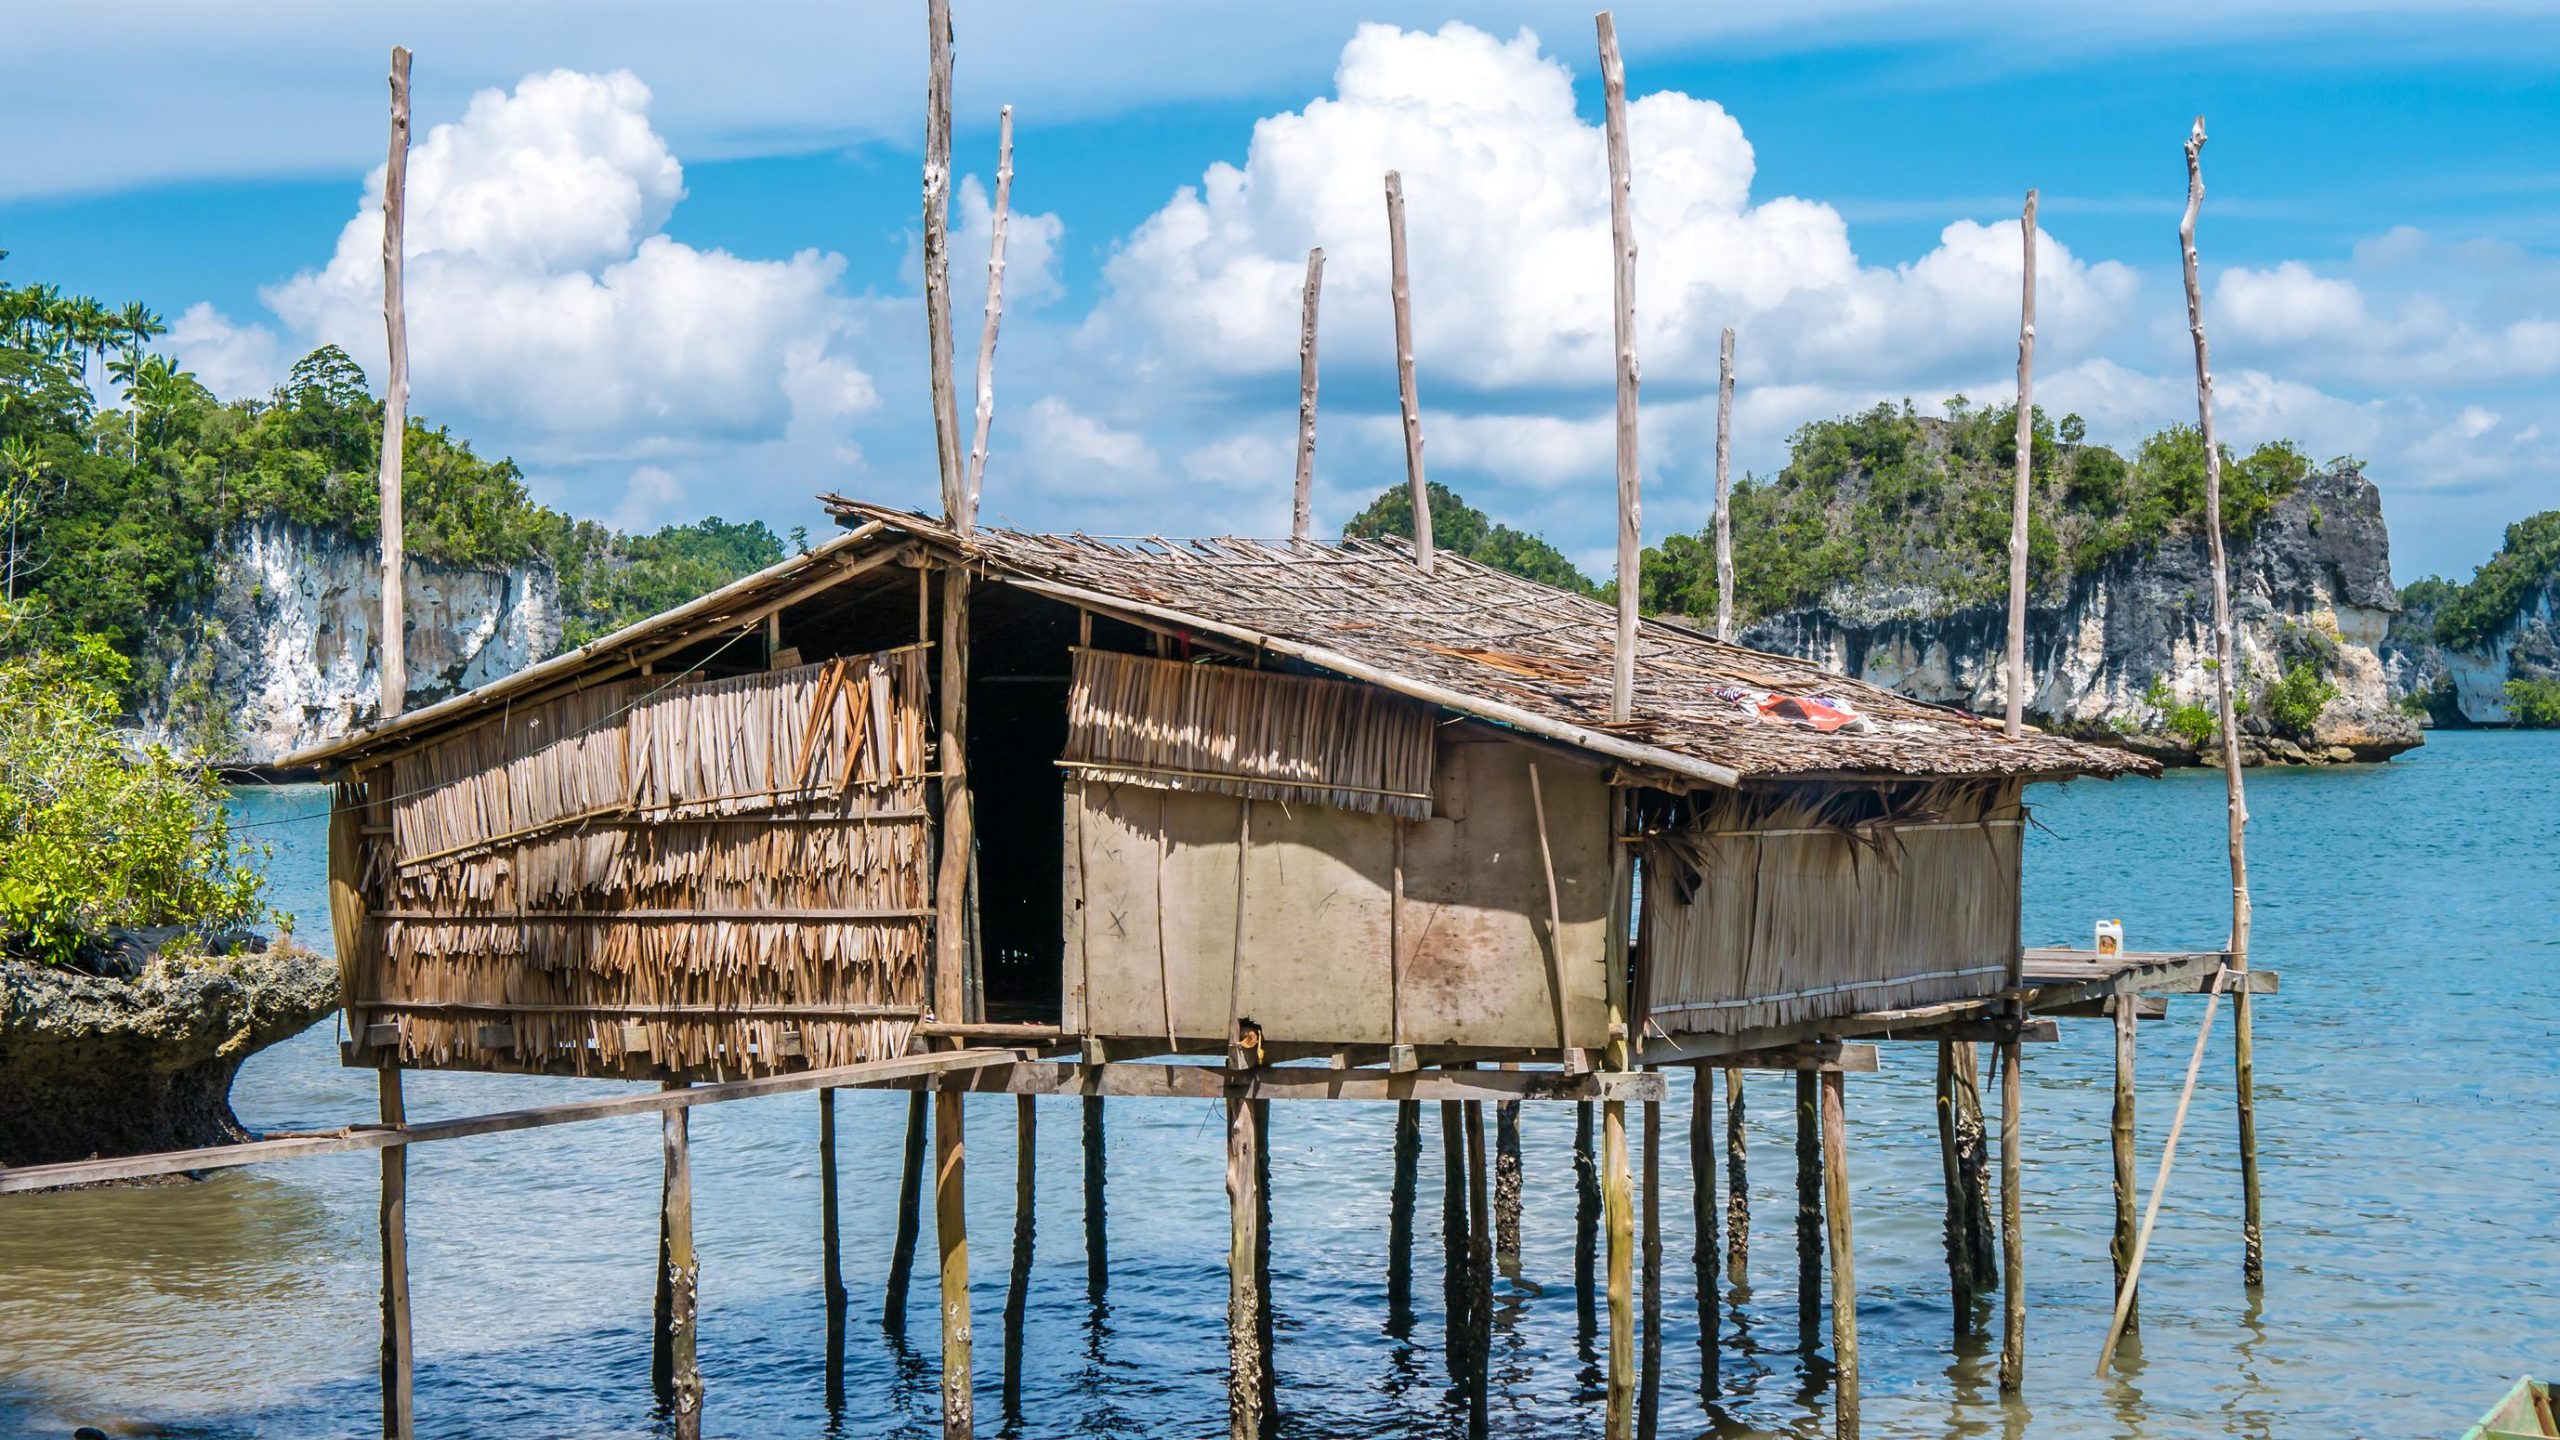 Bamboo hut on stilts over the water in Rajat Ampat